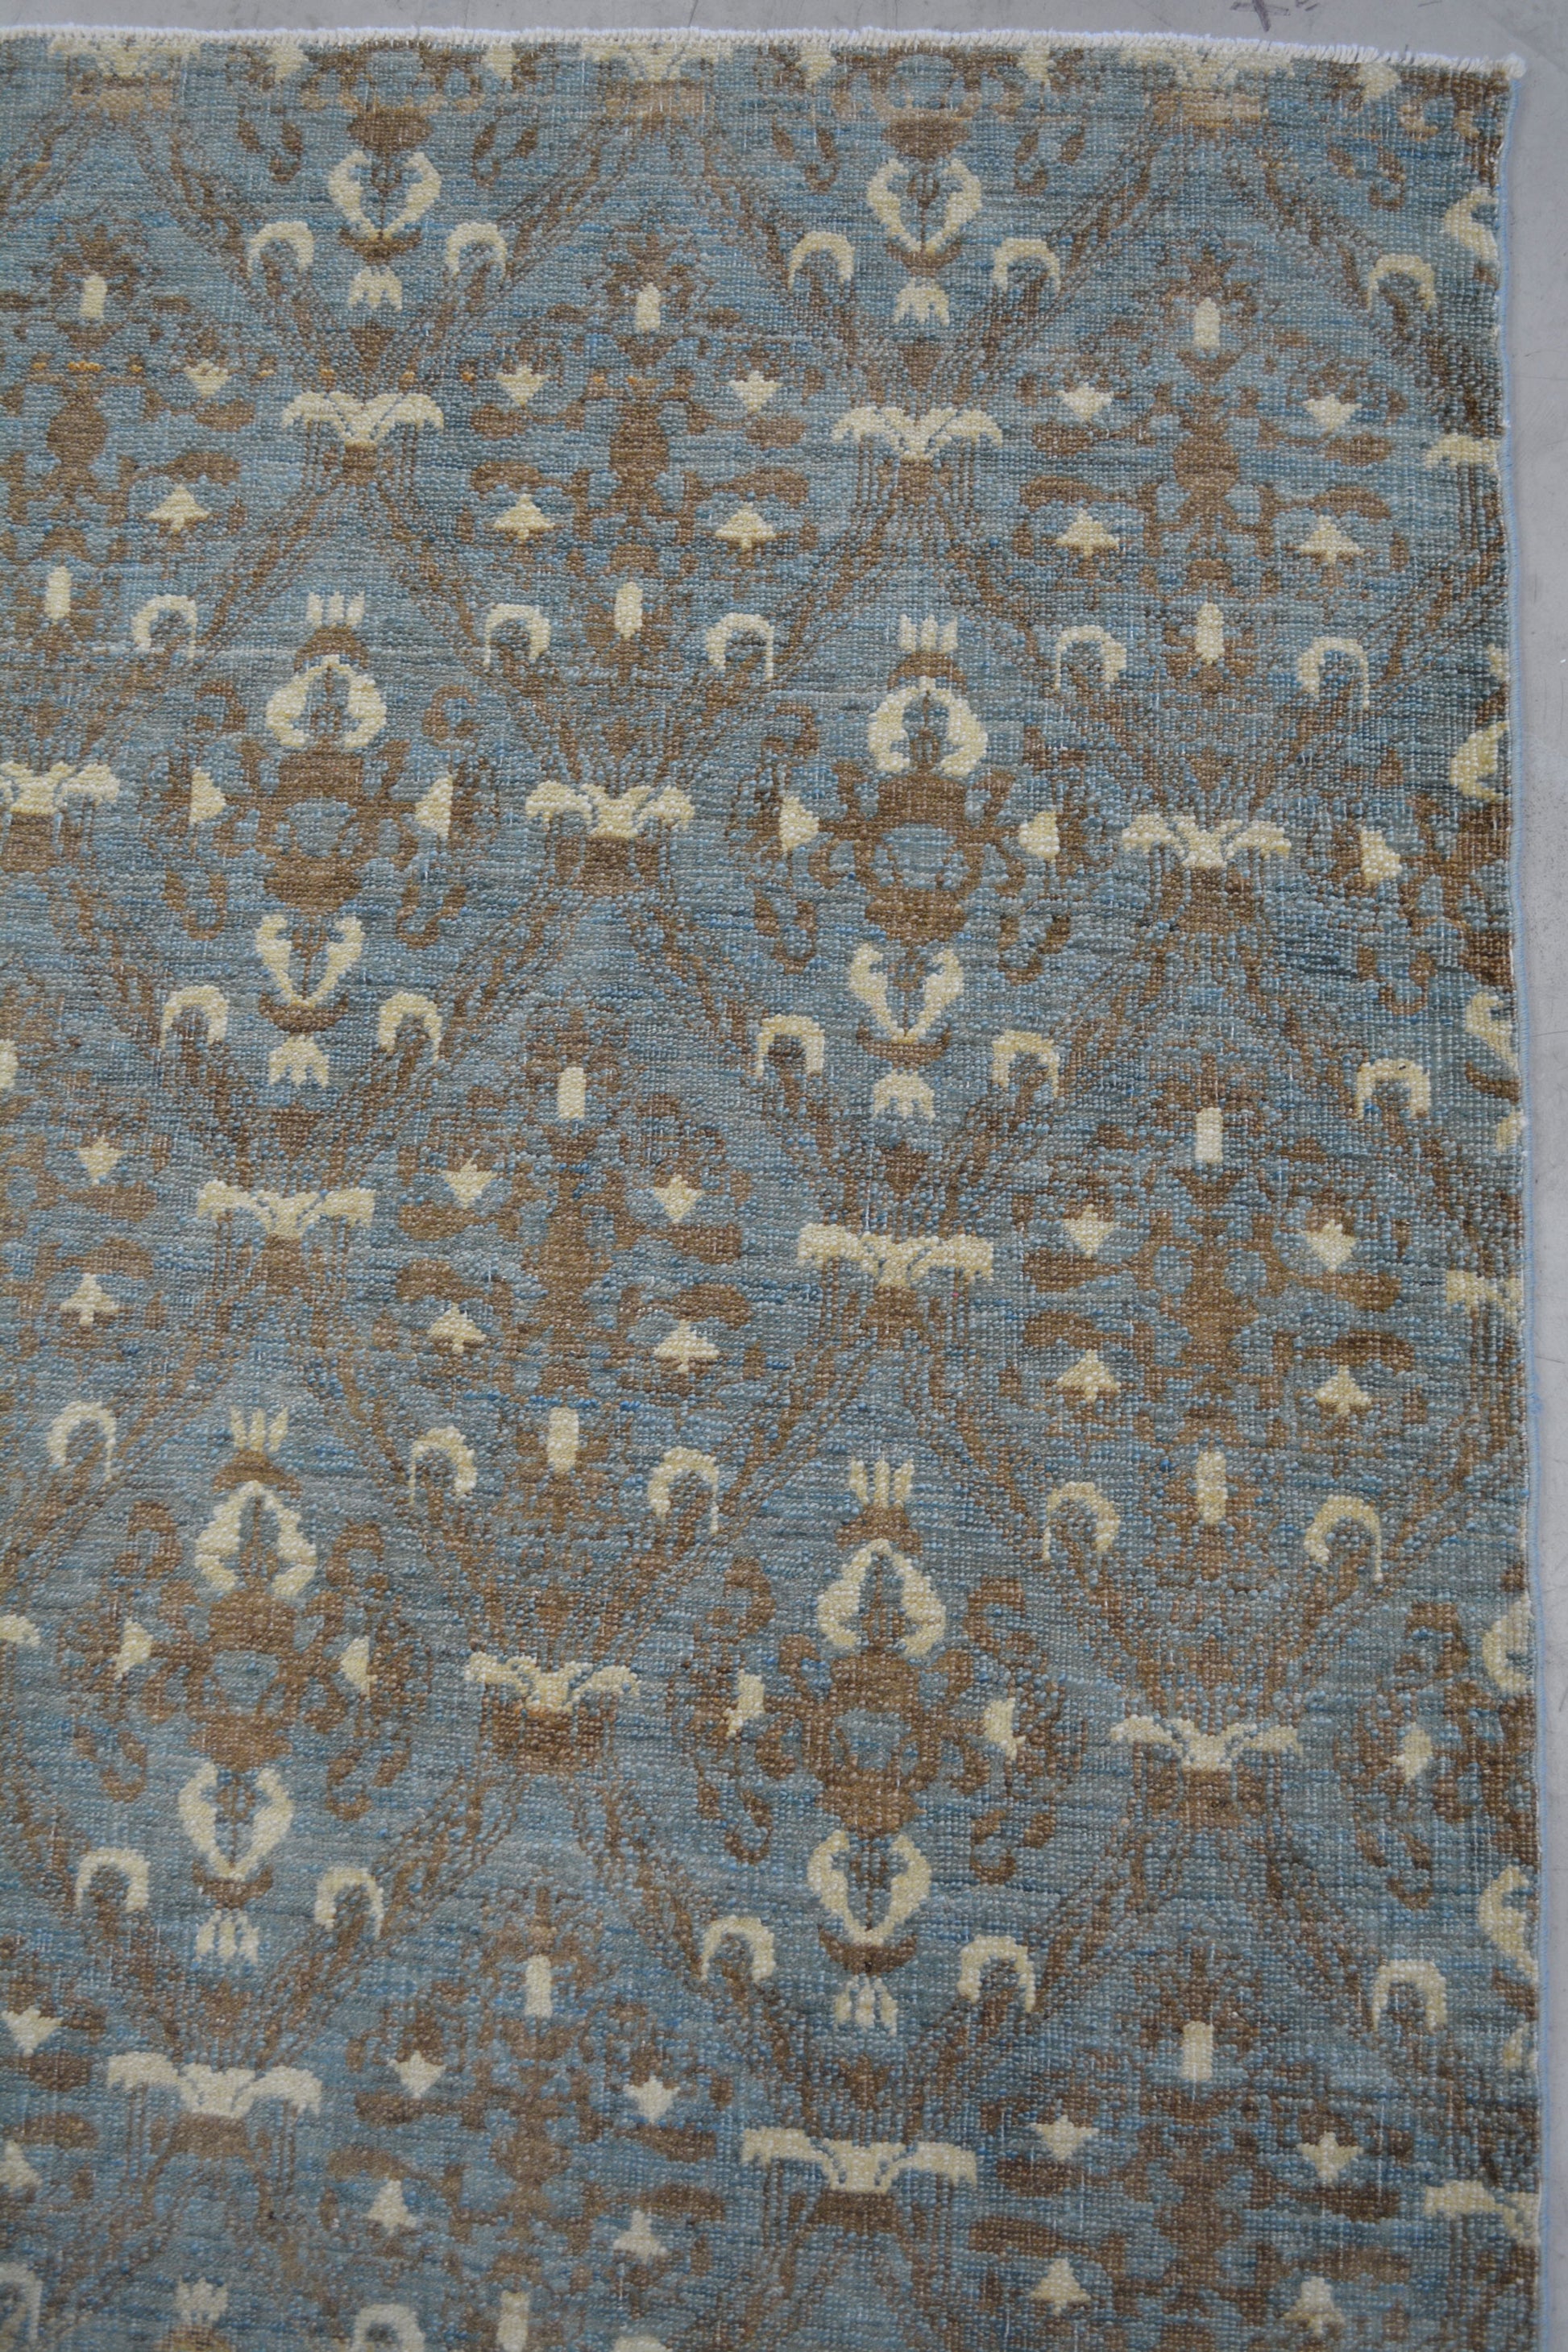 In the upper right corner, the pattern is evenly rendered across the entire rug. 